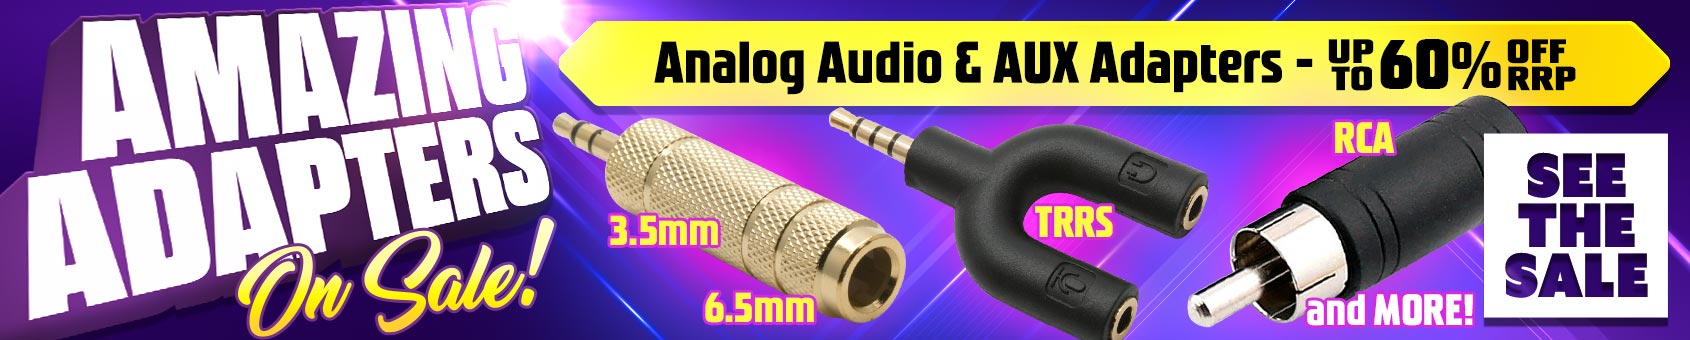 Our BIGGEST SALE EVER on Analogue Audio Adapters during April!!!